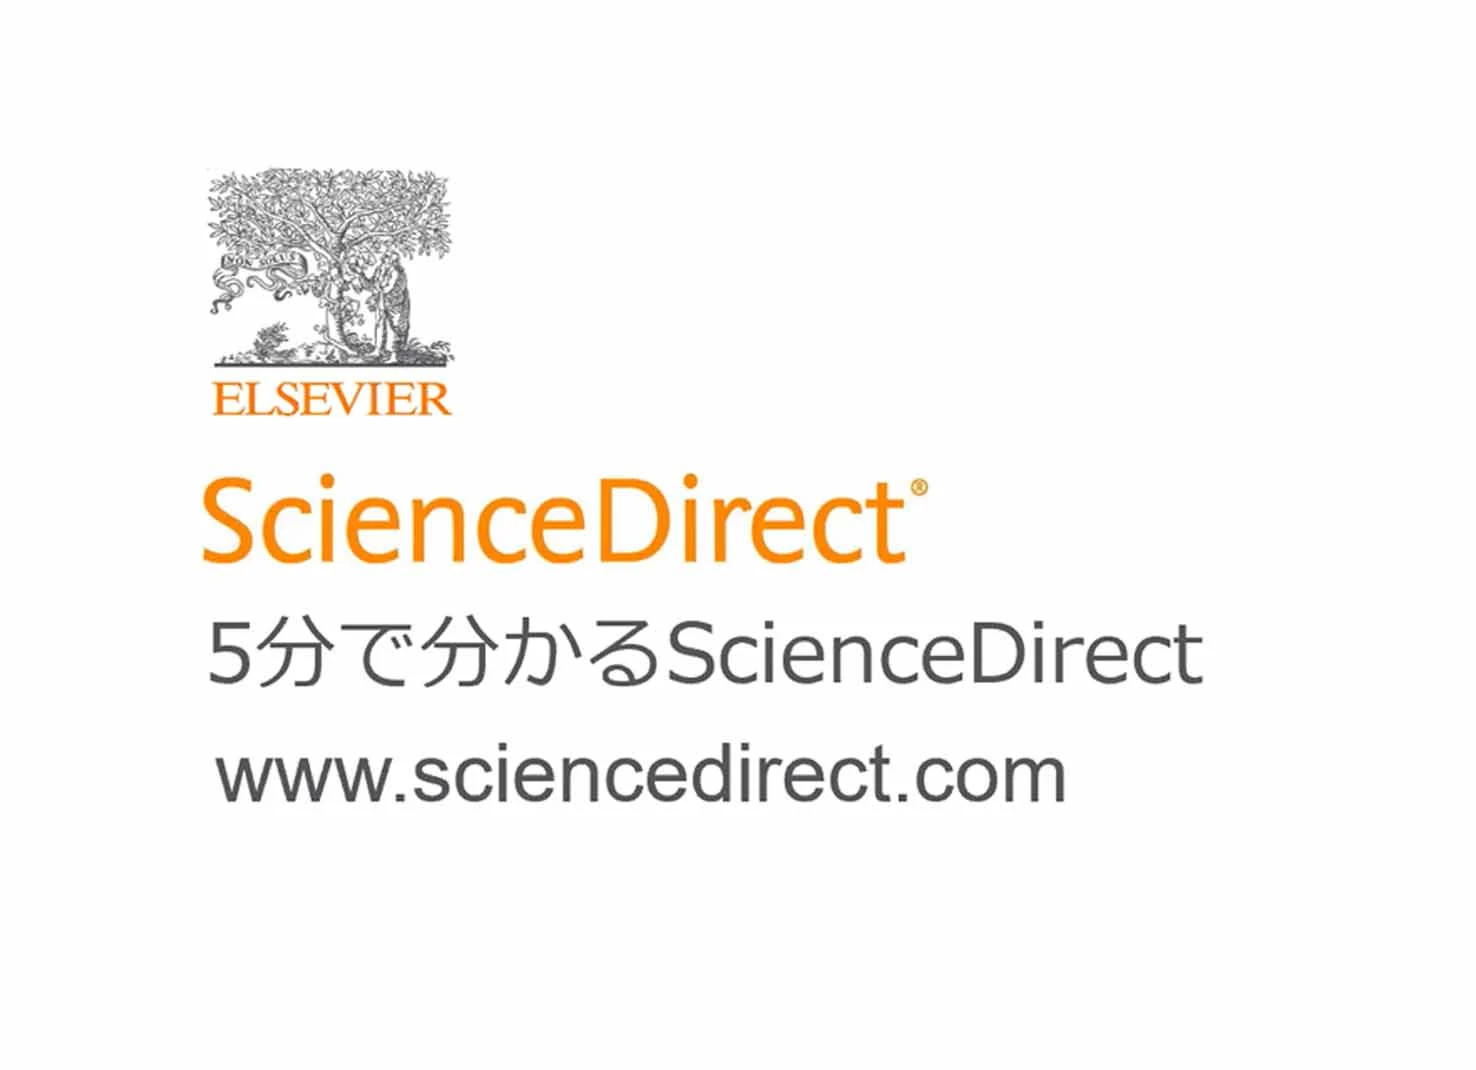 ScienceDirect introduction